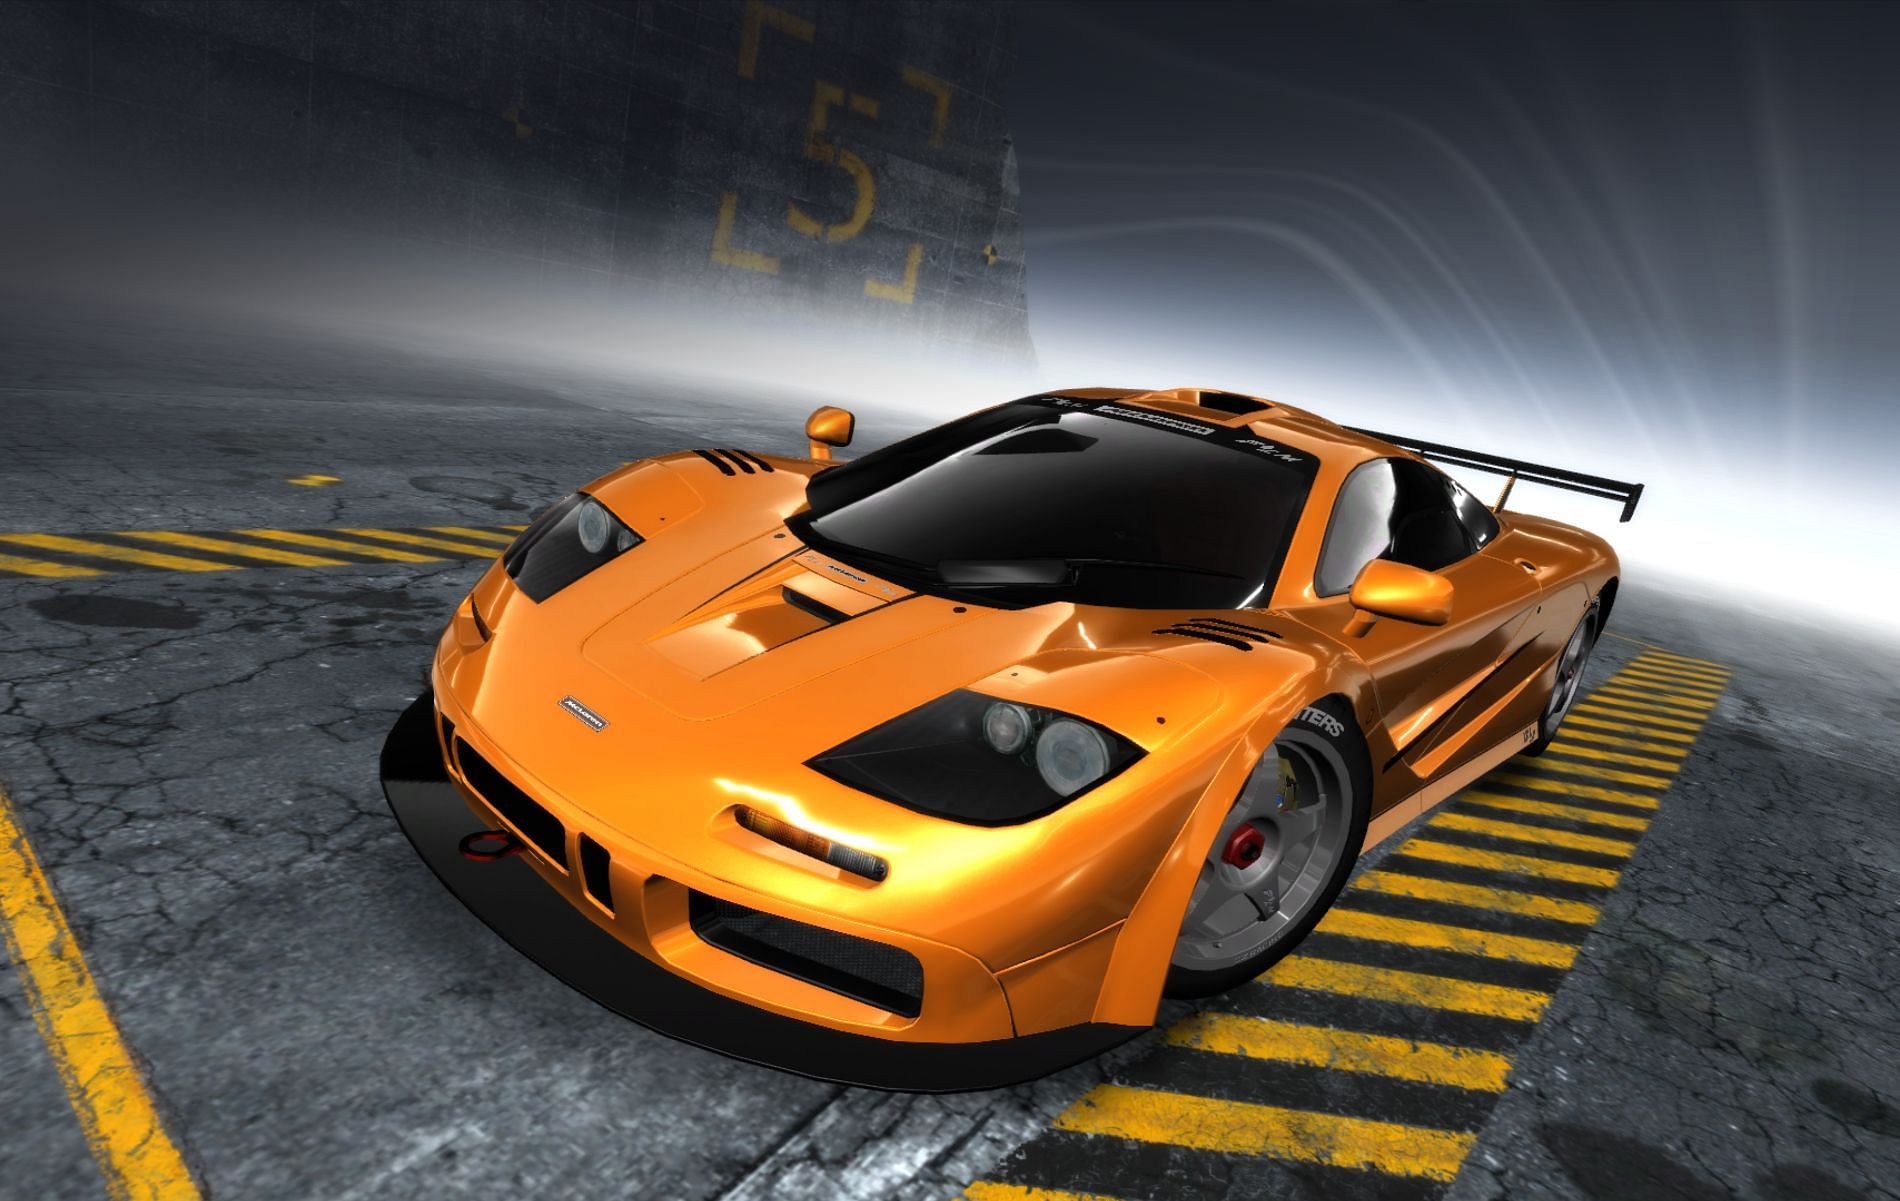 The McLaren F1 &ndash; the undisputed leader among all vintage sports cars (Image via EA)